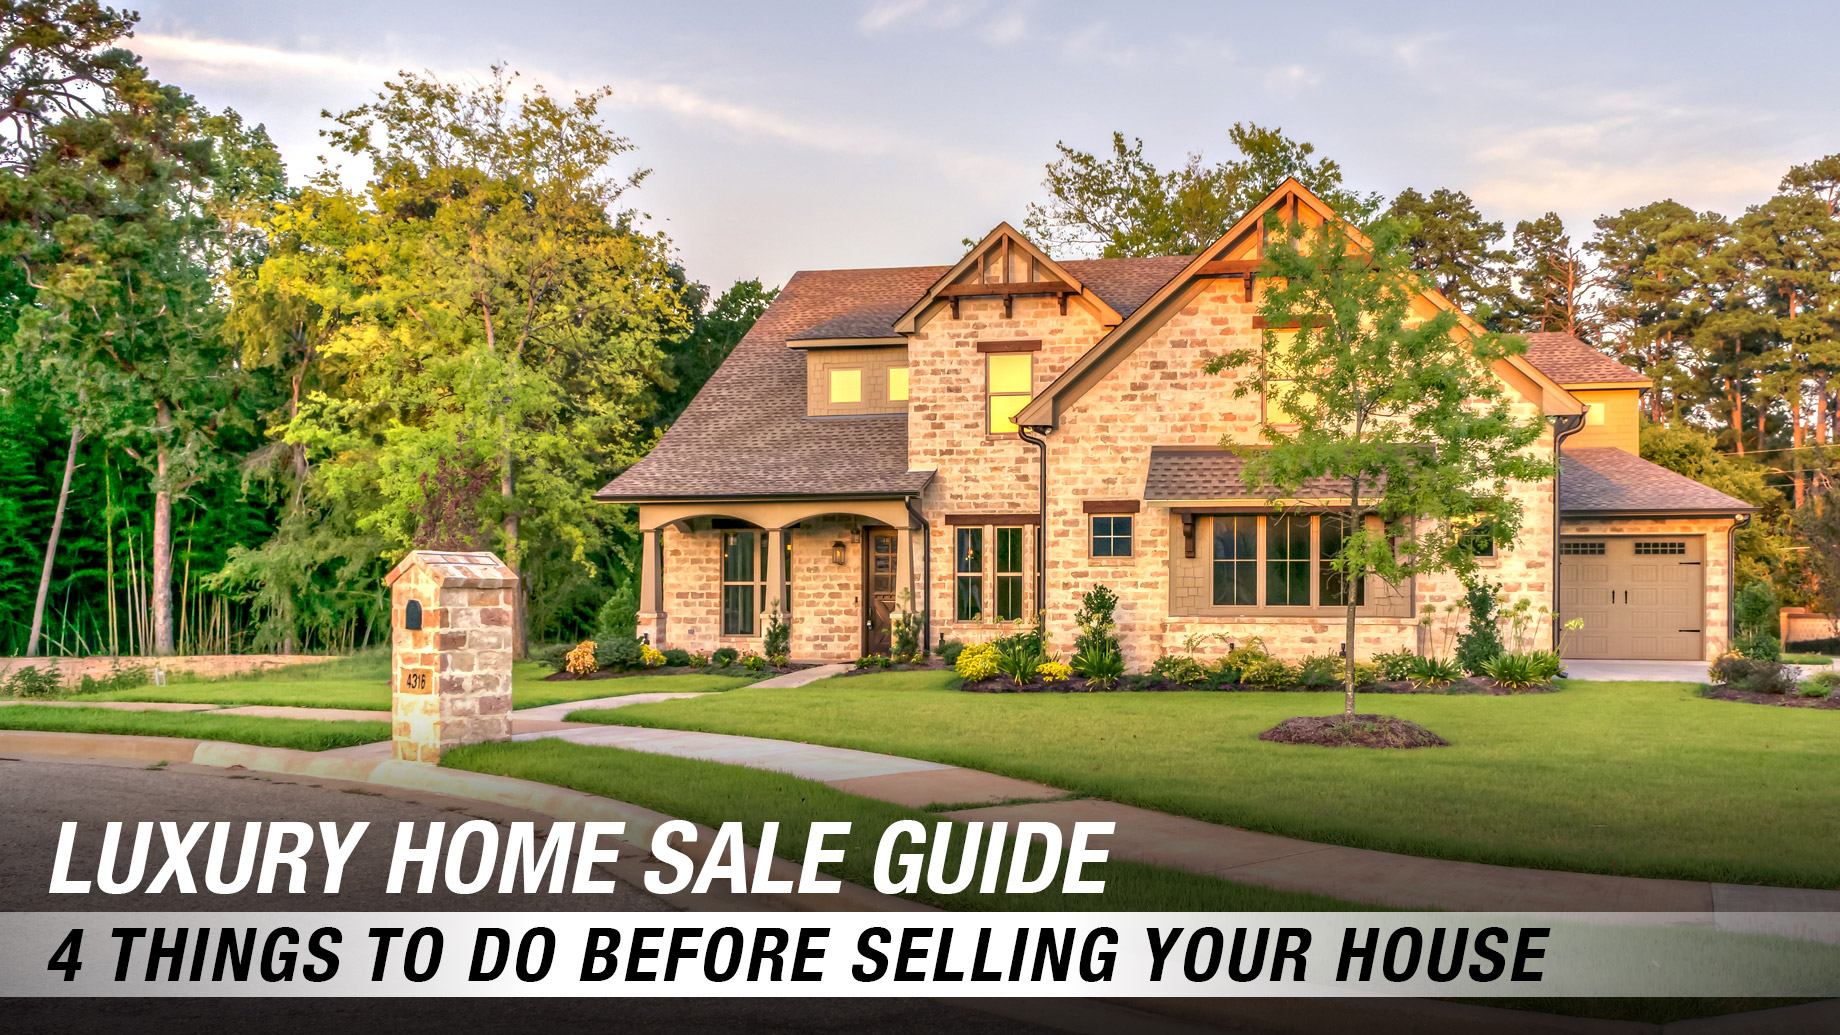 Luxury Home Sale Guide - 4 Things To Do Before Selling Your House